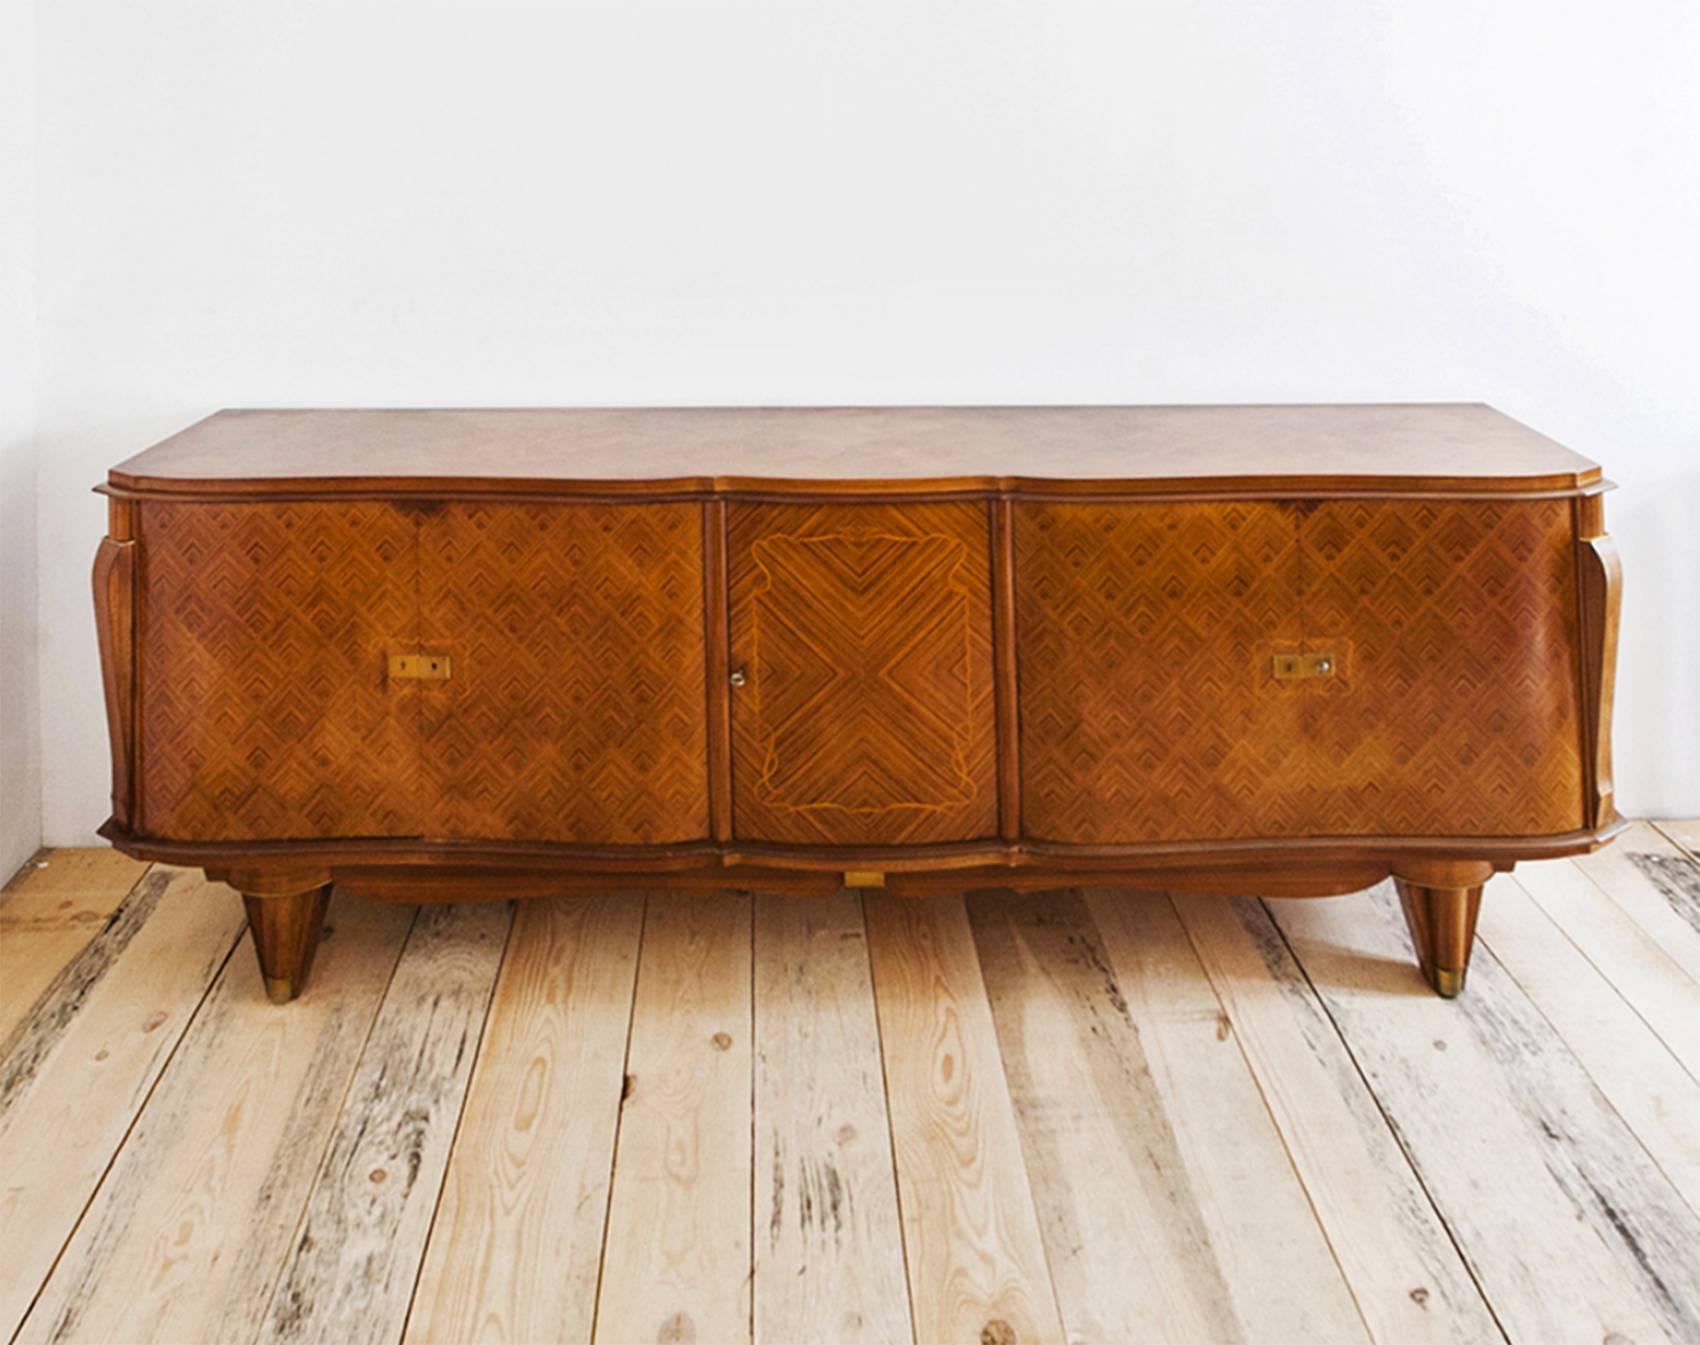 Very high quality French Art Deco sideboard attributed to one of the most prominent French Art Deco designers Jules Leleu. Produced in the 1940s in marquetry technique in diamond pattern. In good condition, never been restored, really minor traces